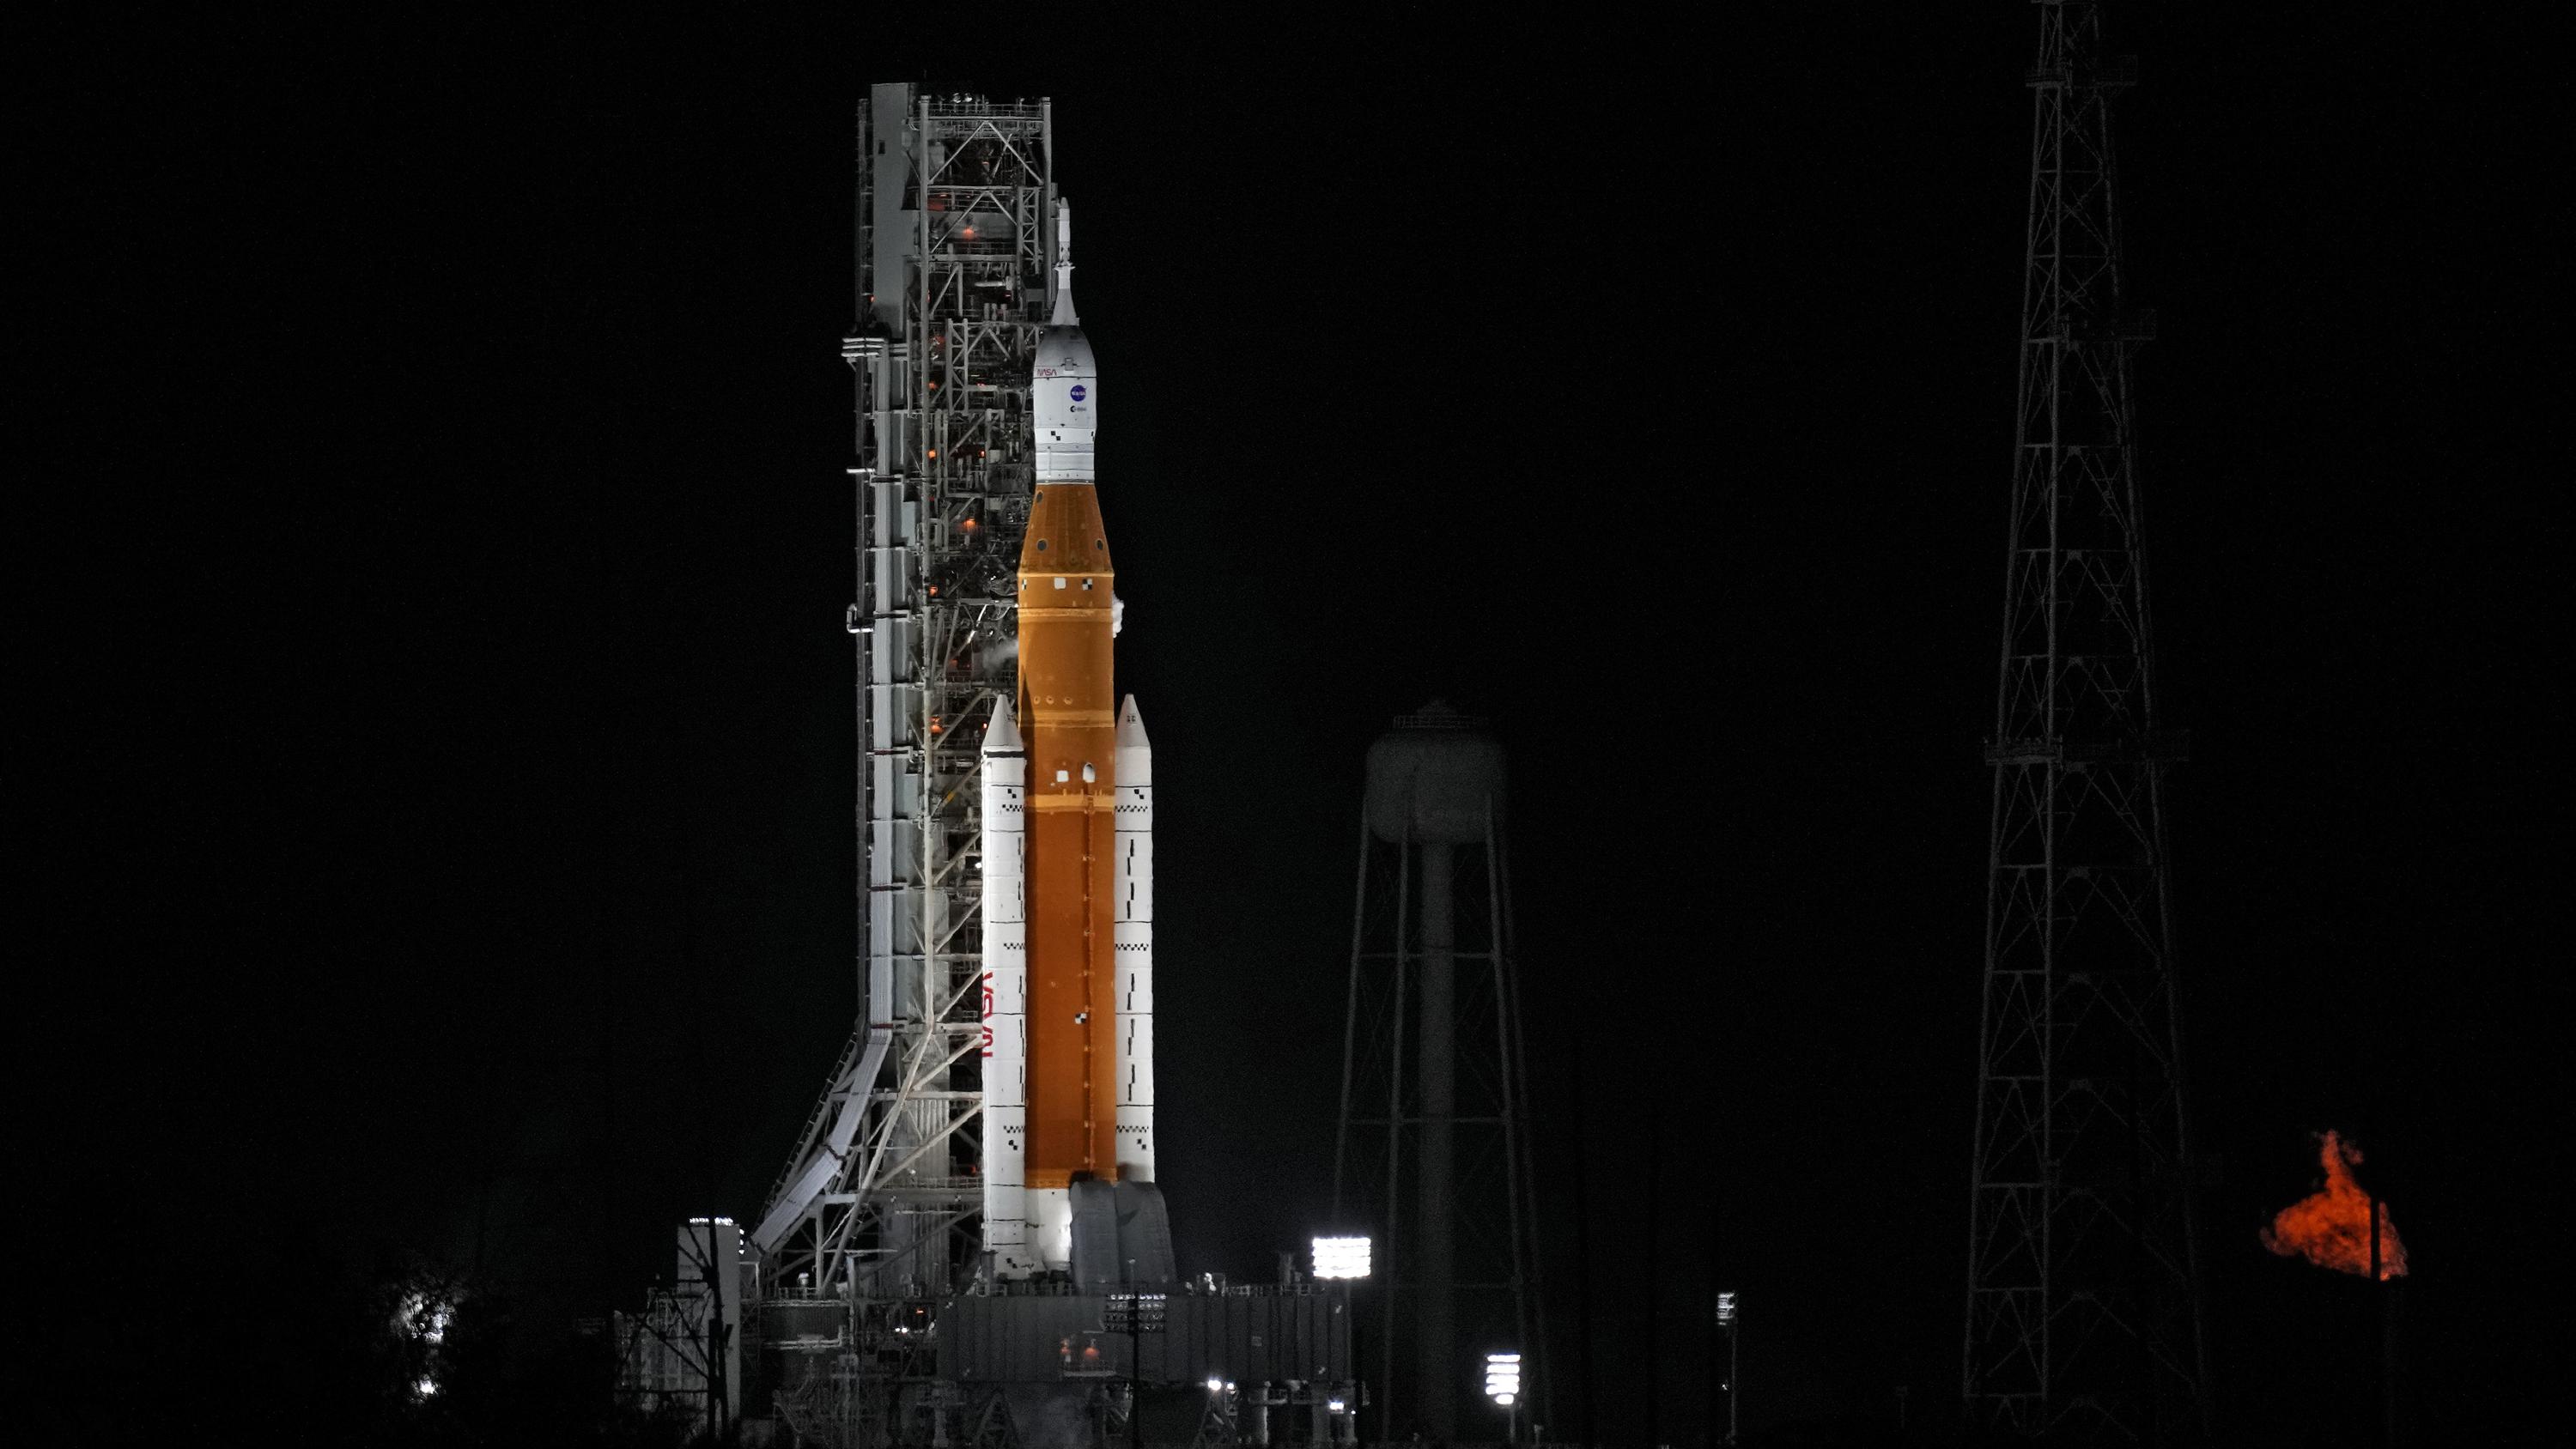 NASA fixes new leak, resumes fueling moon rocket for launch